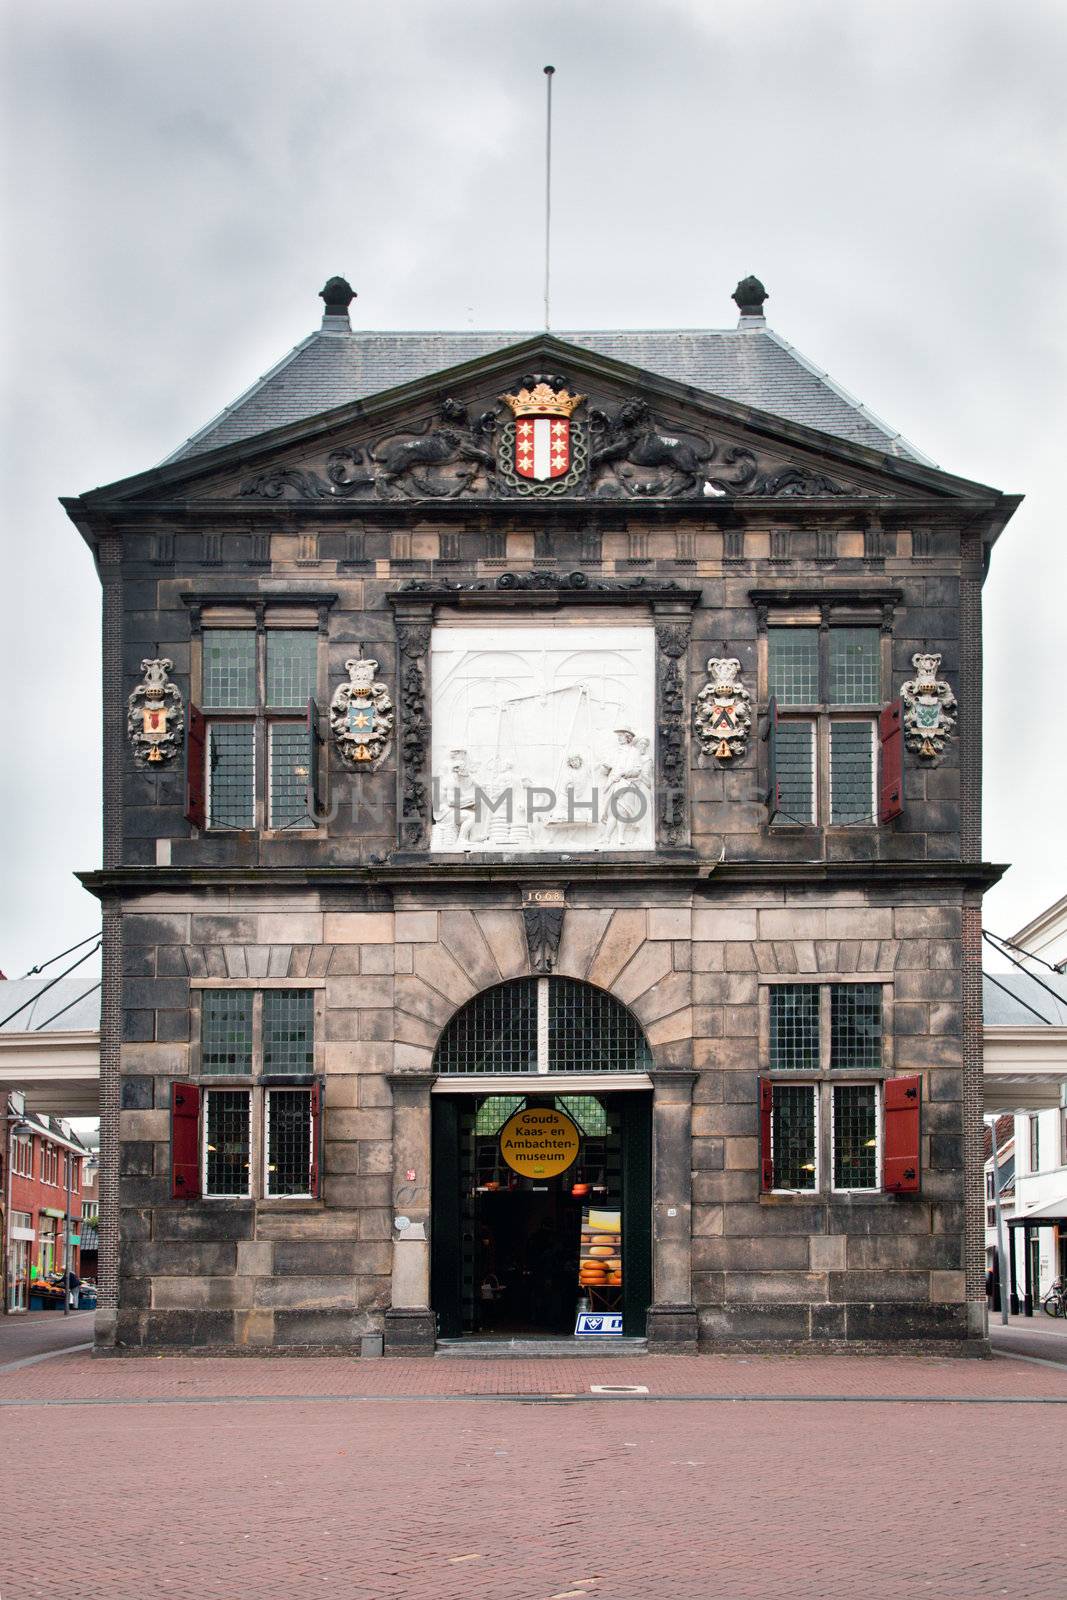 The museum of cheese in Gouda, Holland, Netherlands